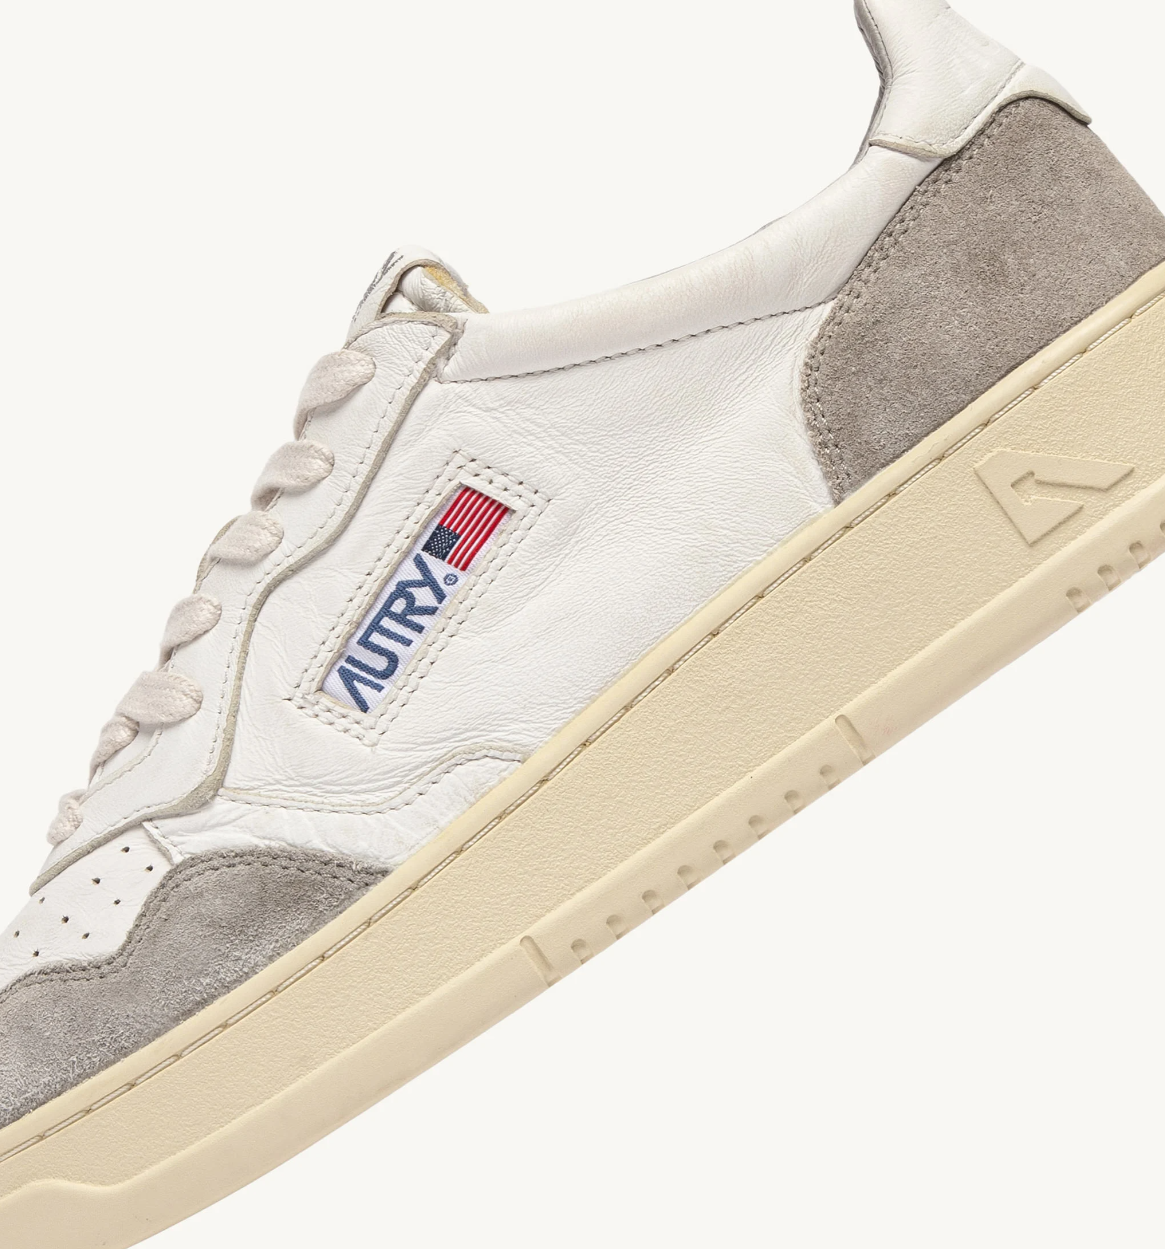 MEDALIST LOW GS25 GOAT/SUEDE WHITE/GREY